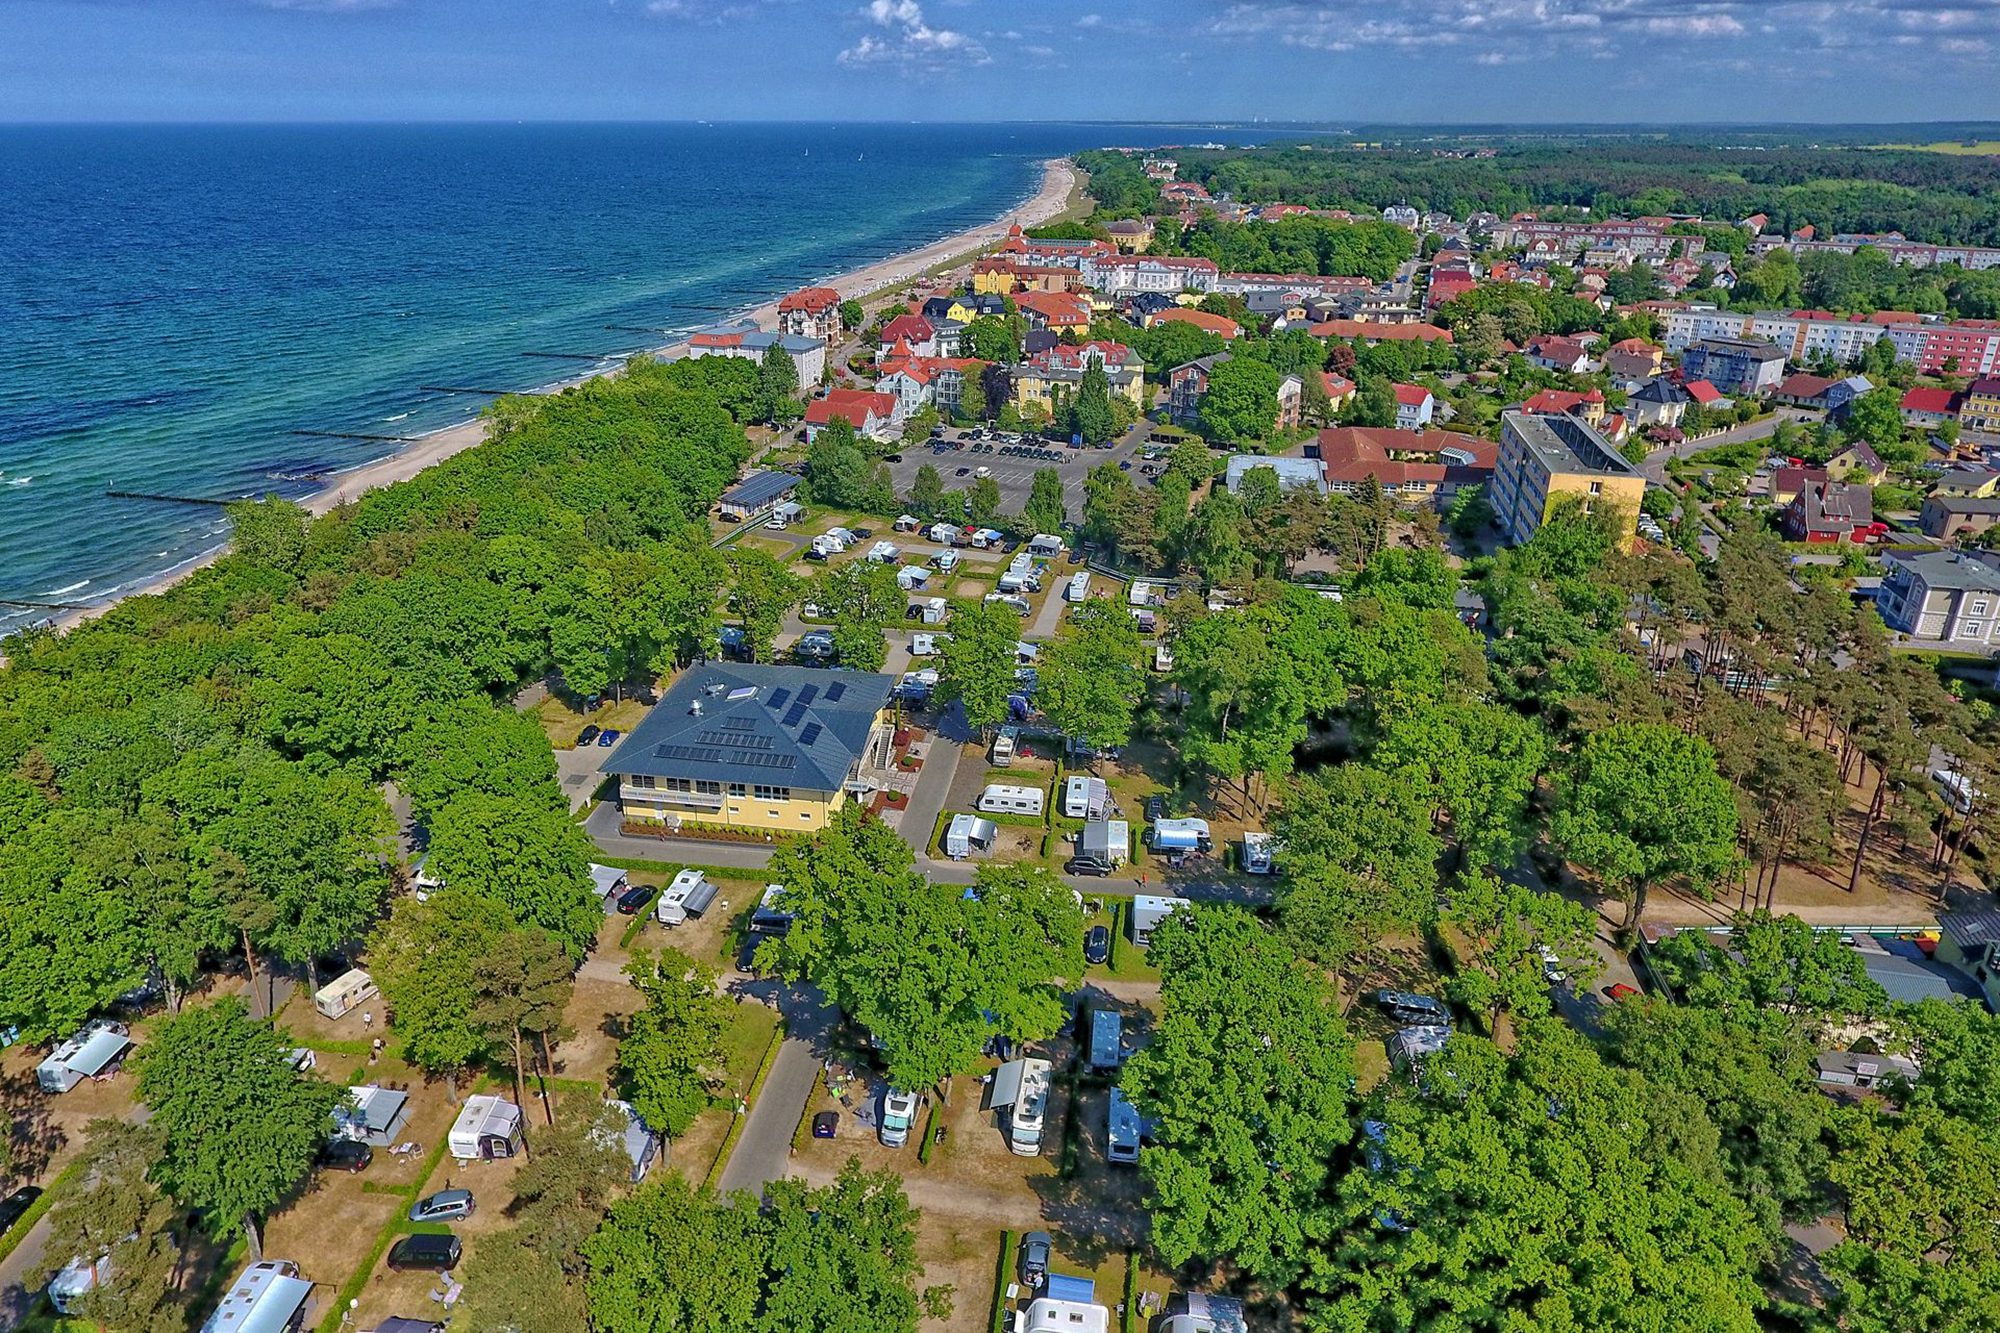 According to one recent ranking, Germany's Kühlungsborn camping park is the most popular campsite in Europe.